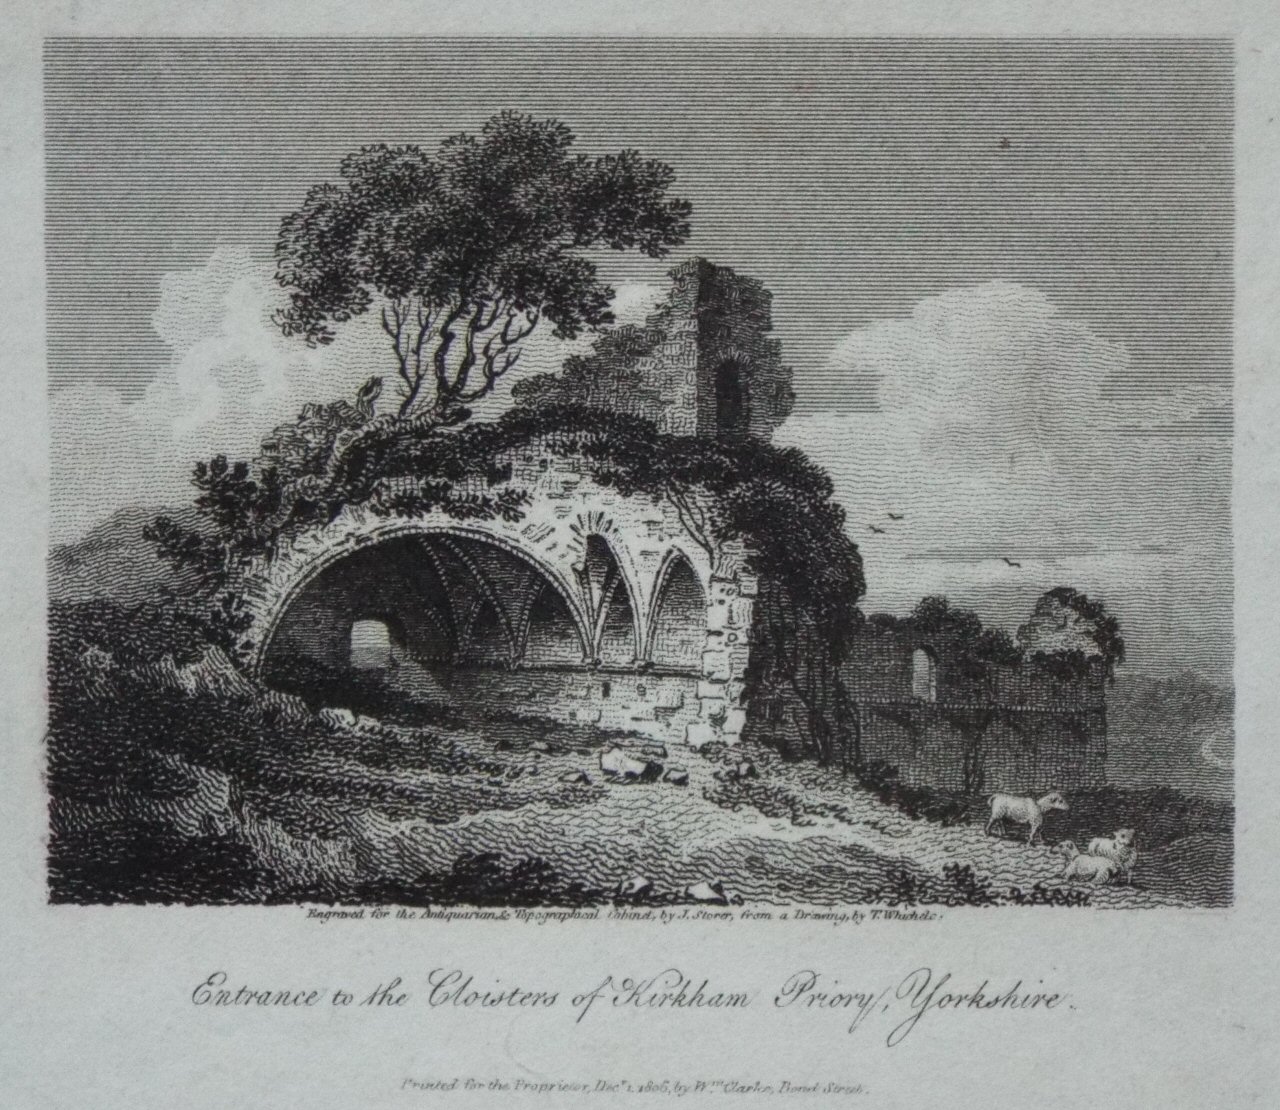 Print - Entrance to the Cloisters of Kirkham Priory, Yorkshire. - Storer